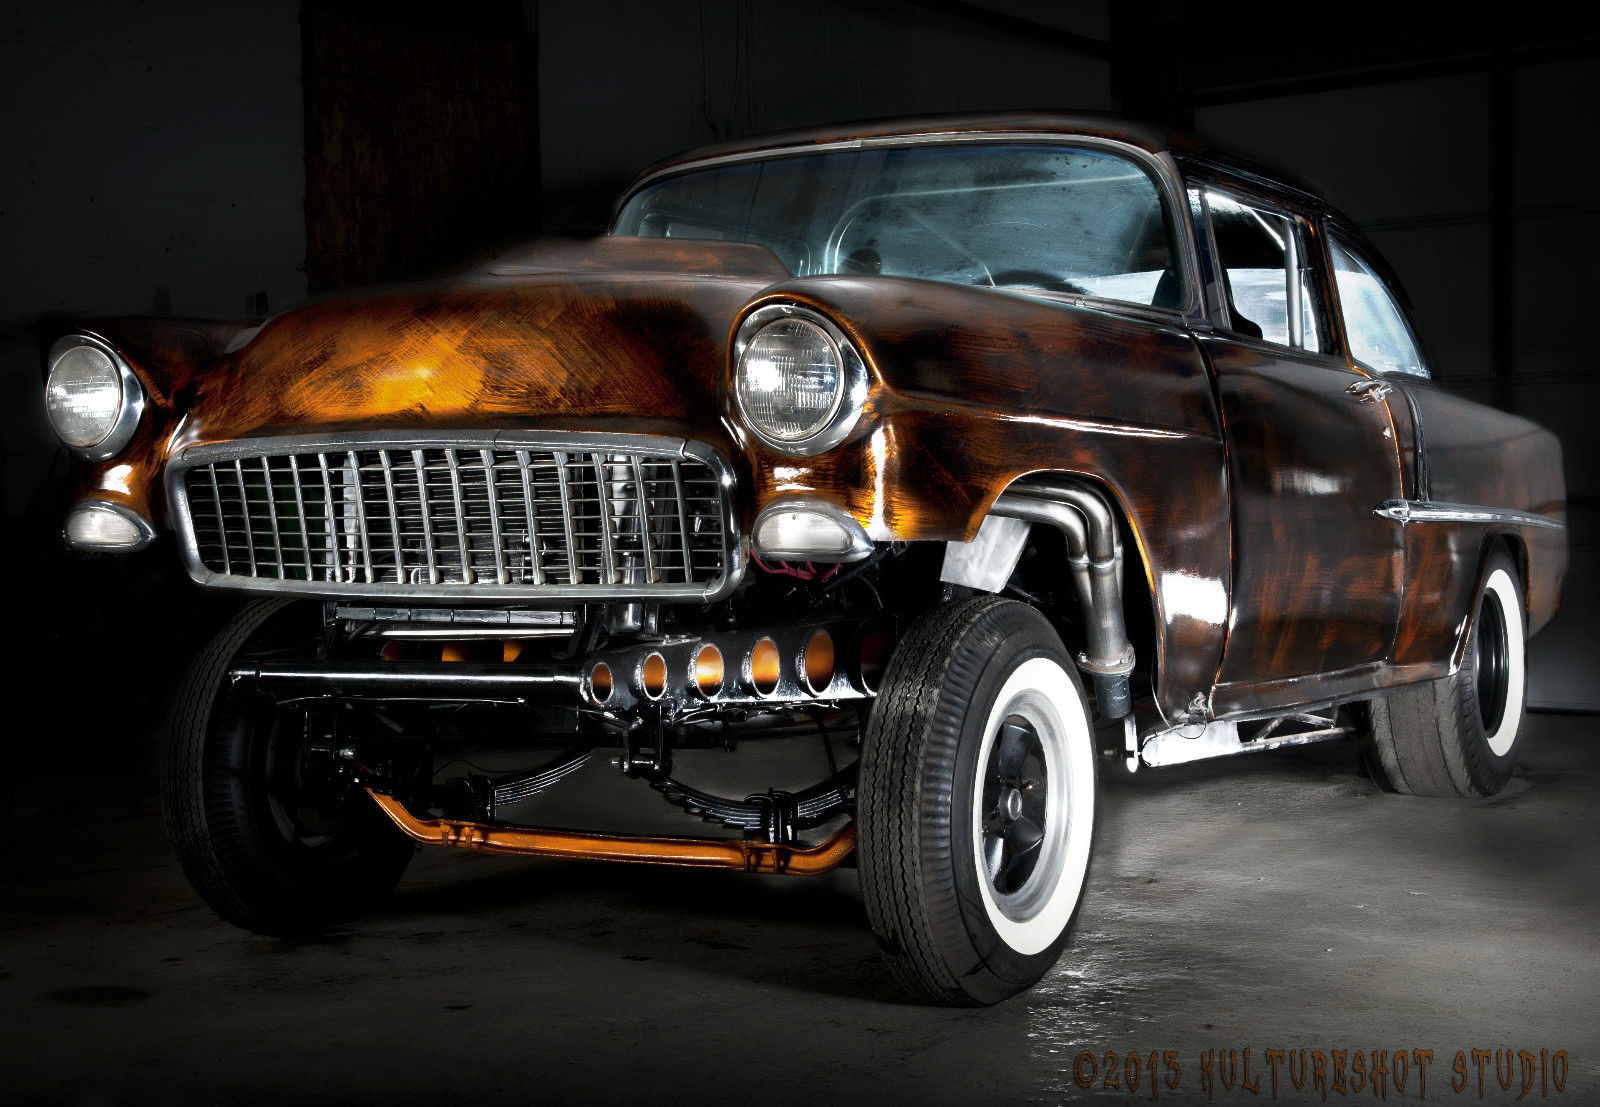 1955 Chevrolet Gasser Project Cars For Sale. 